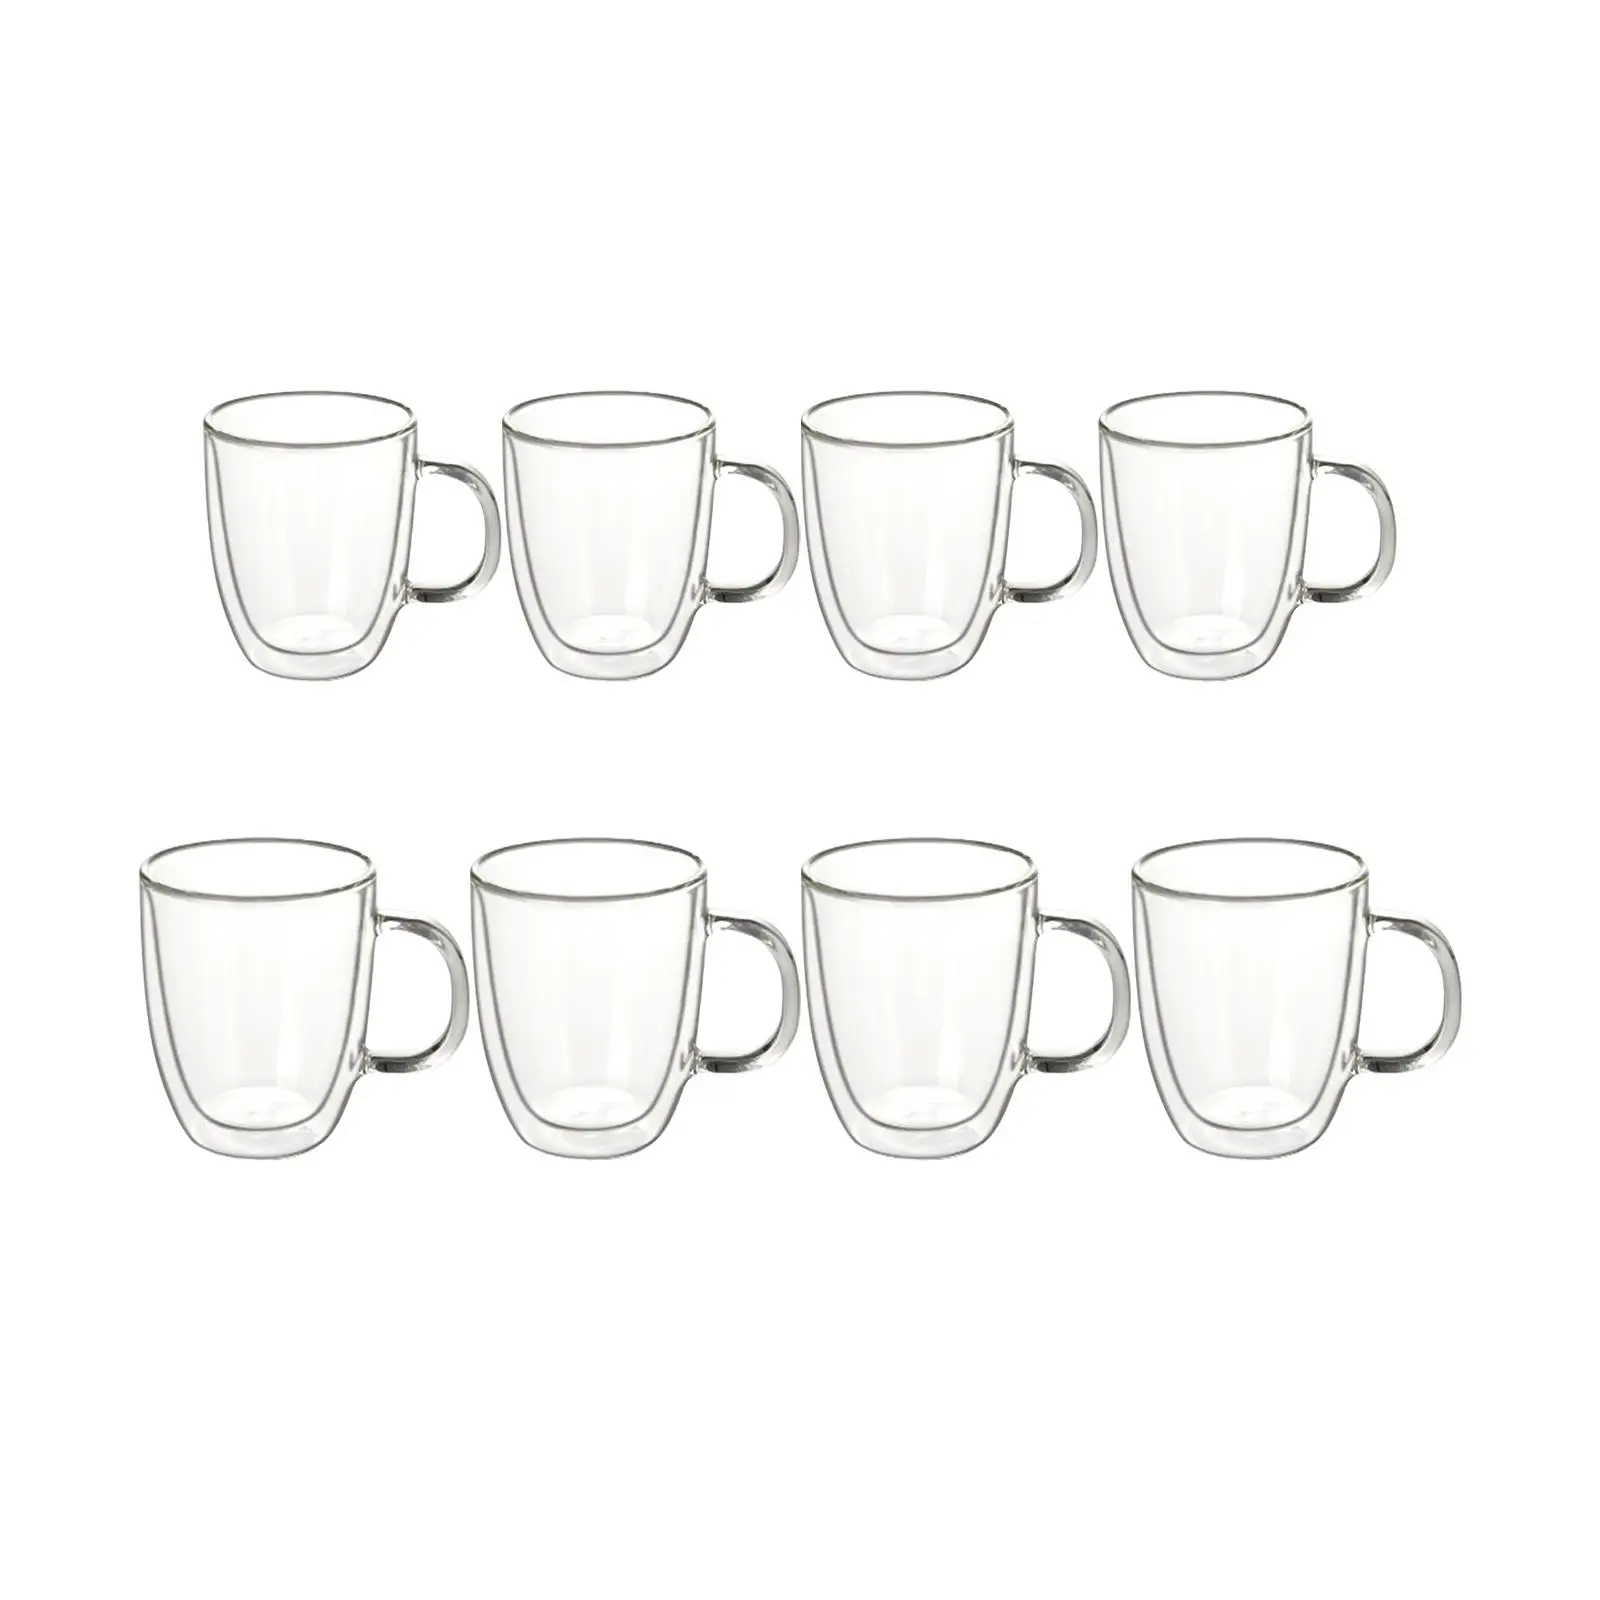 4 Piece Double Wall Glass Cup Drink Mugs Anti-Scalding Heat Resistant Hand Blown Insulated Coffee Mug for Tea Cappuccino Coffee